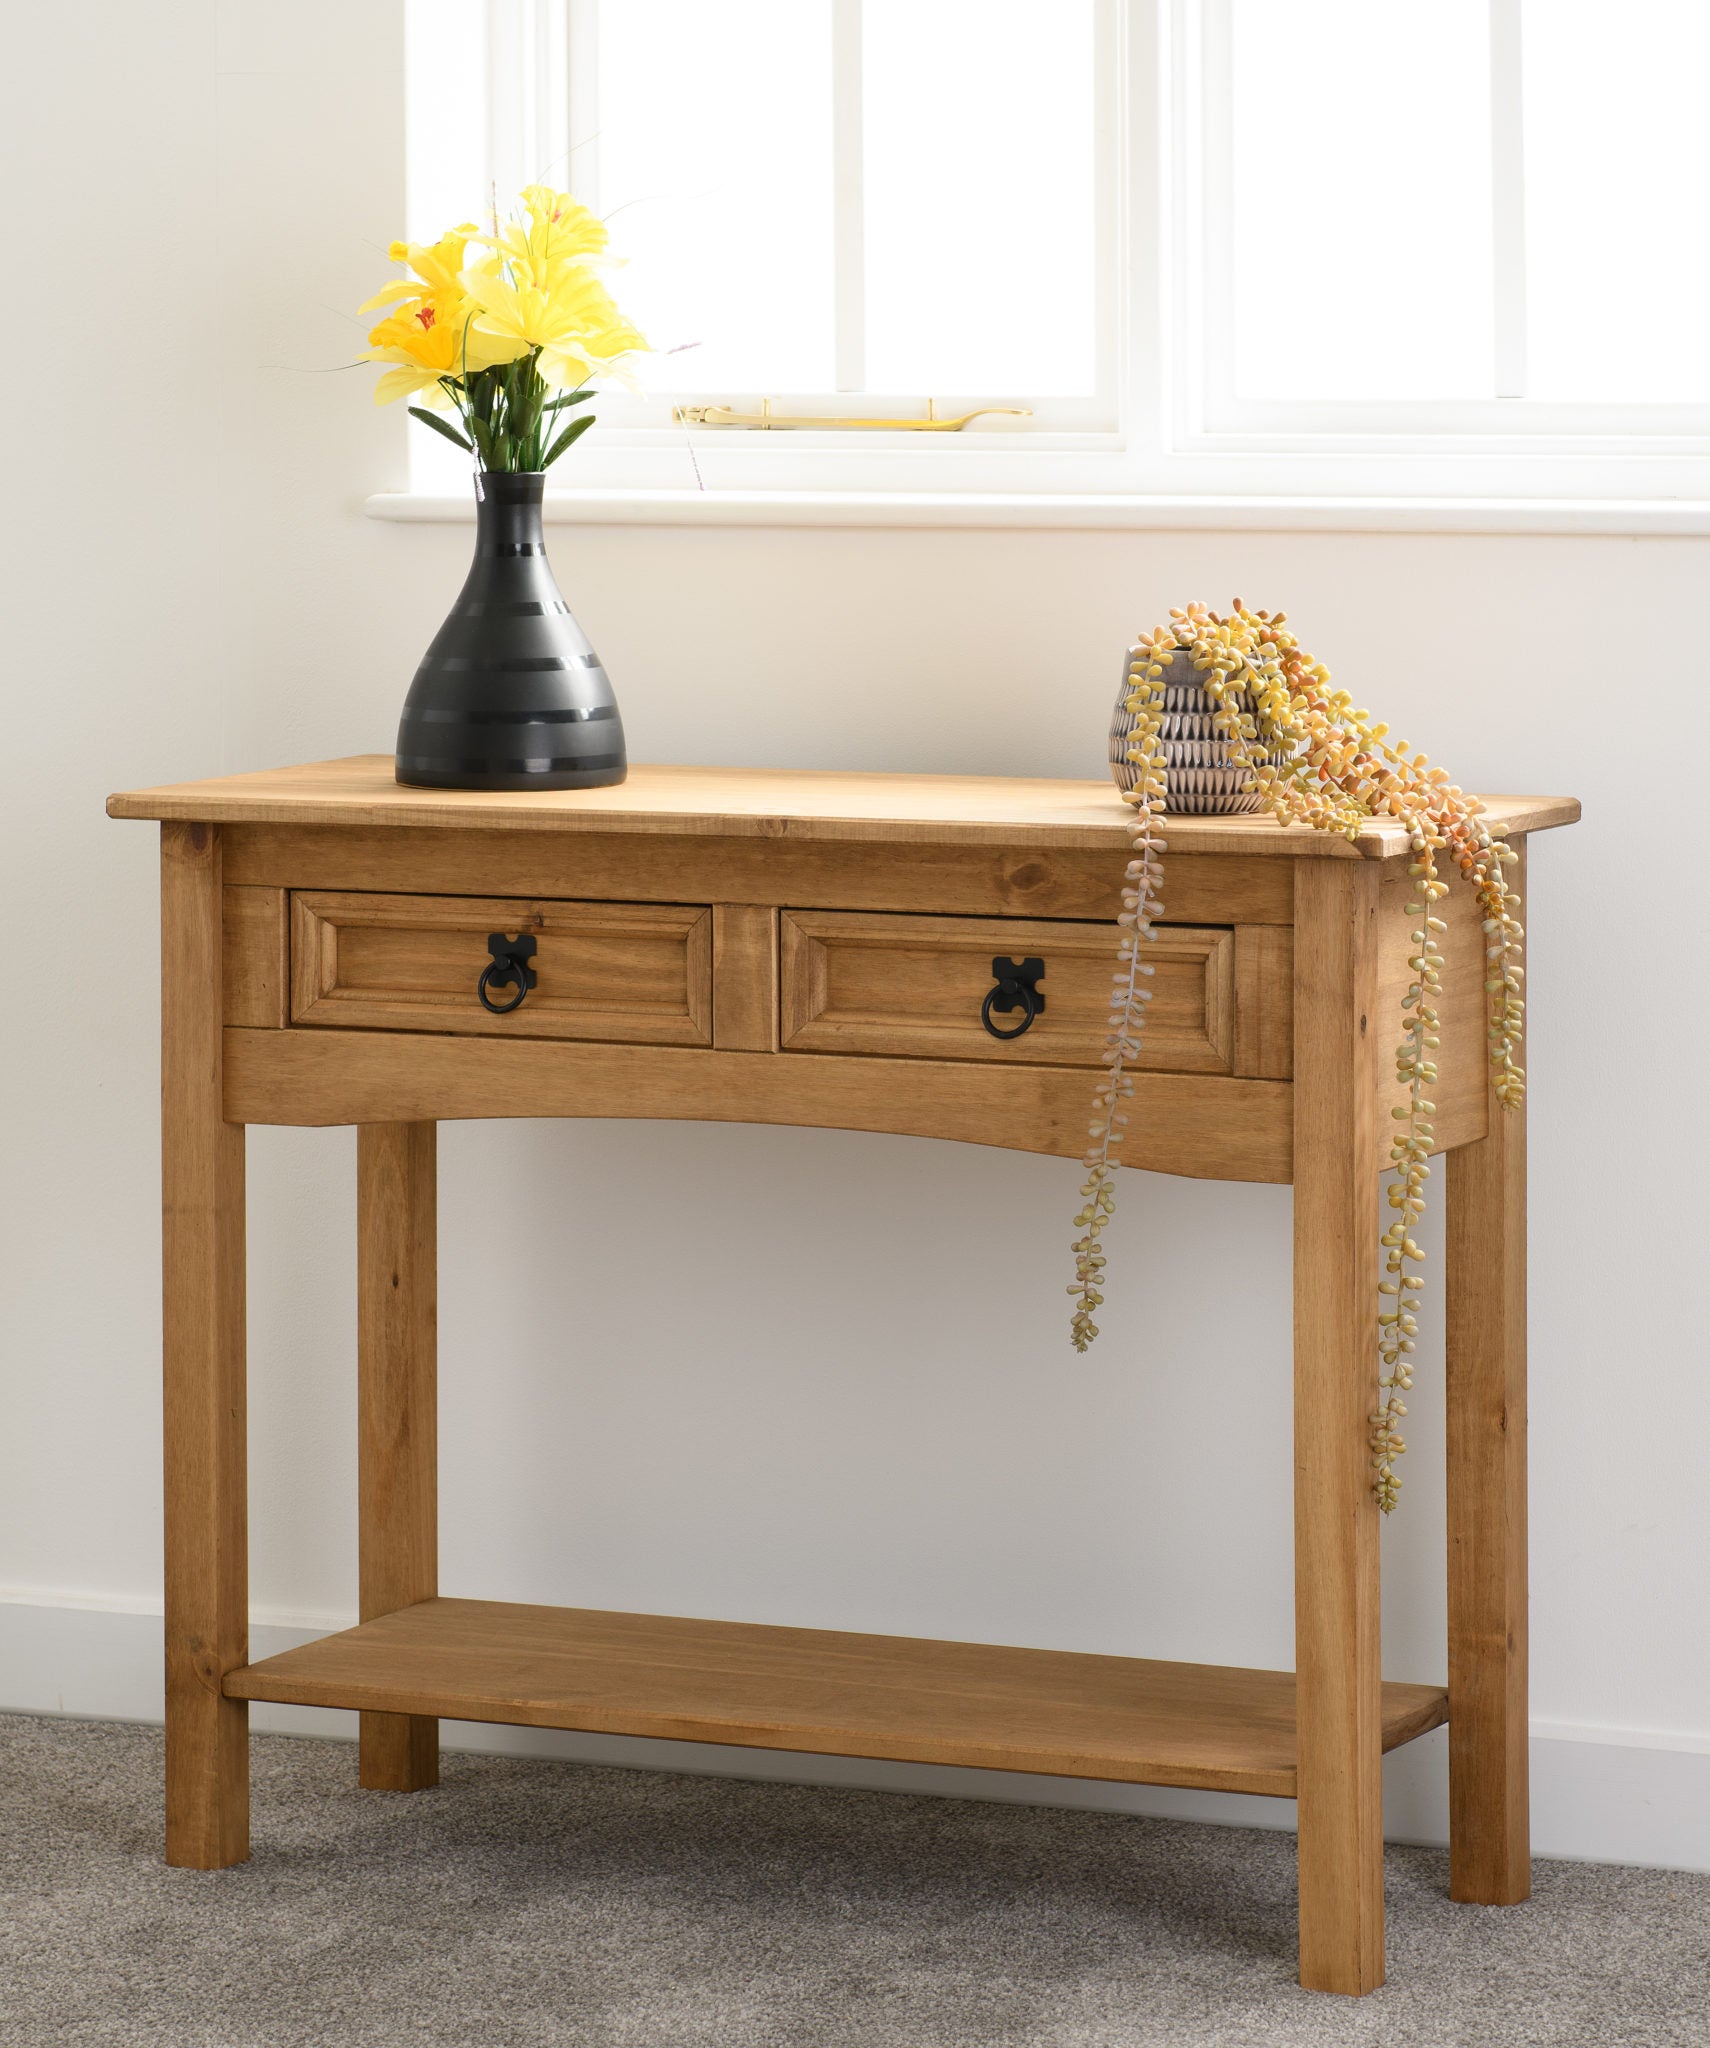 Corona 2 Drawer Console Table With Shelf in Distressed Pine